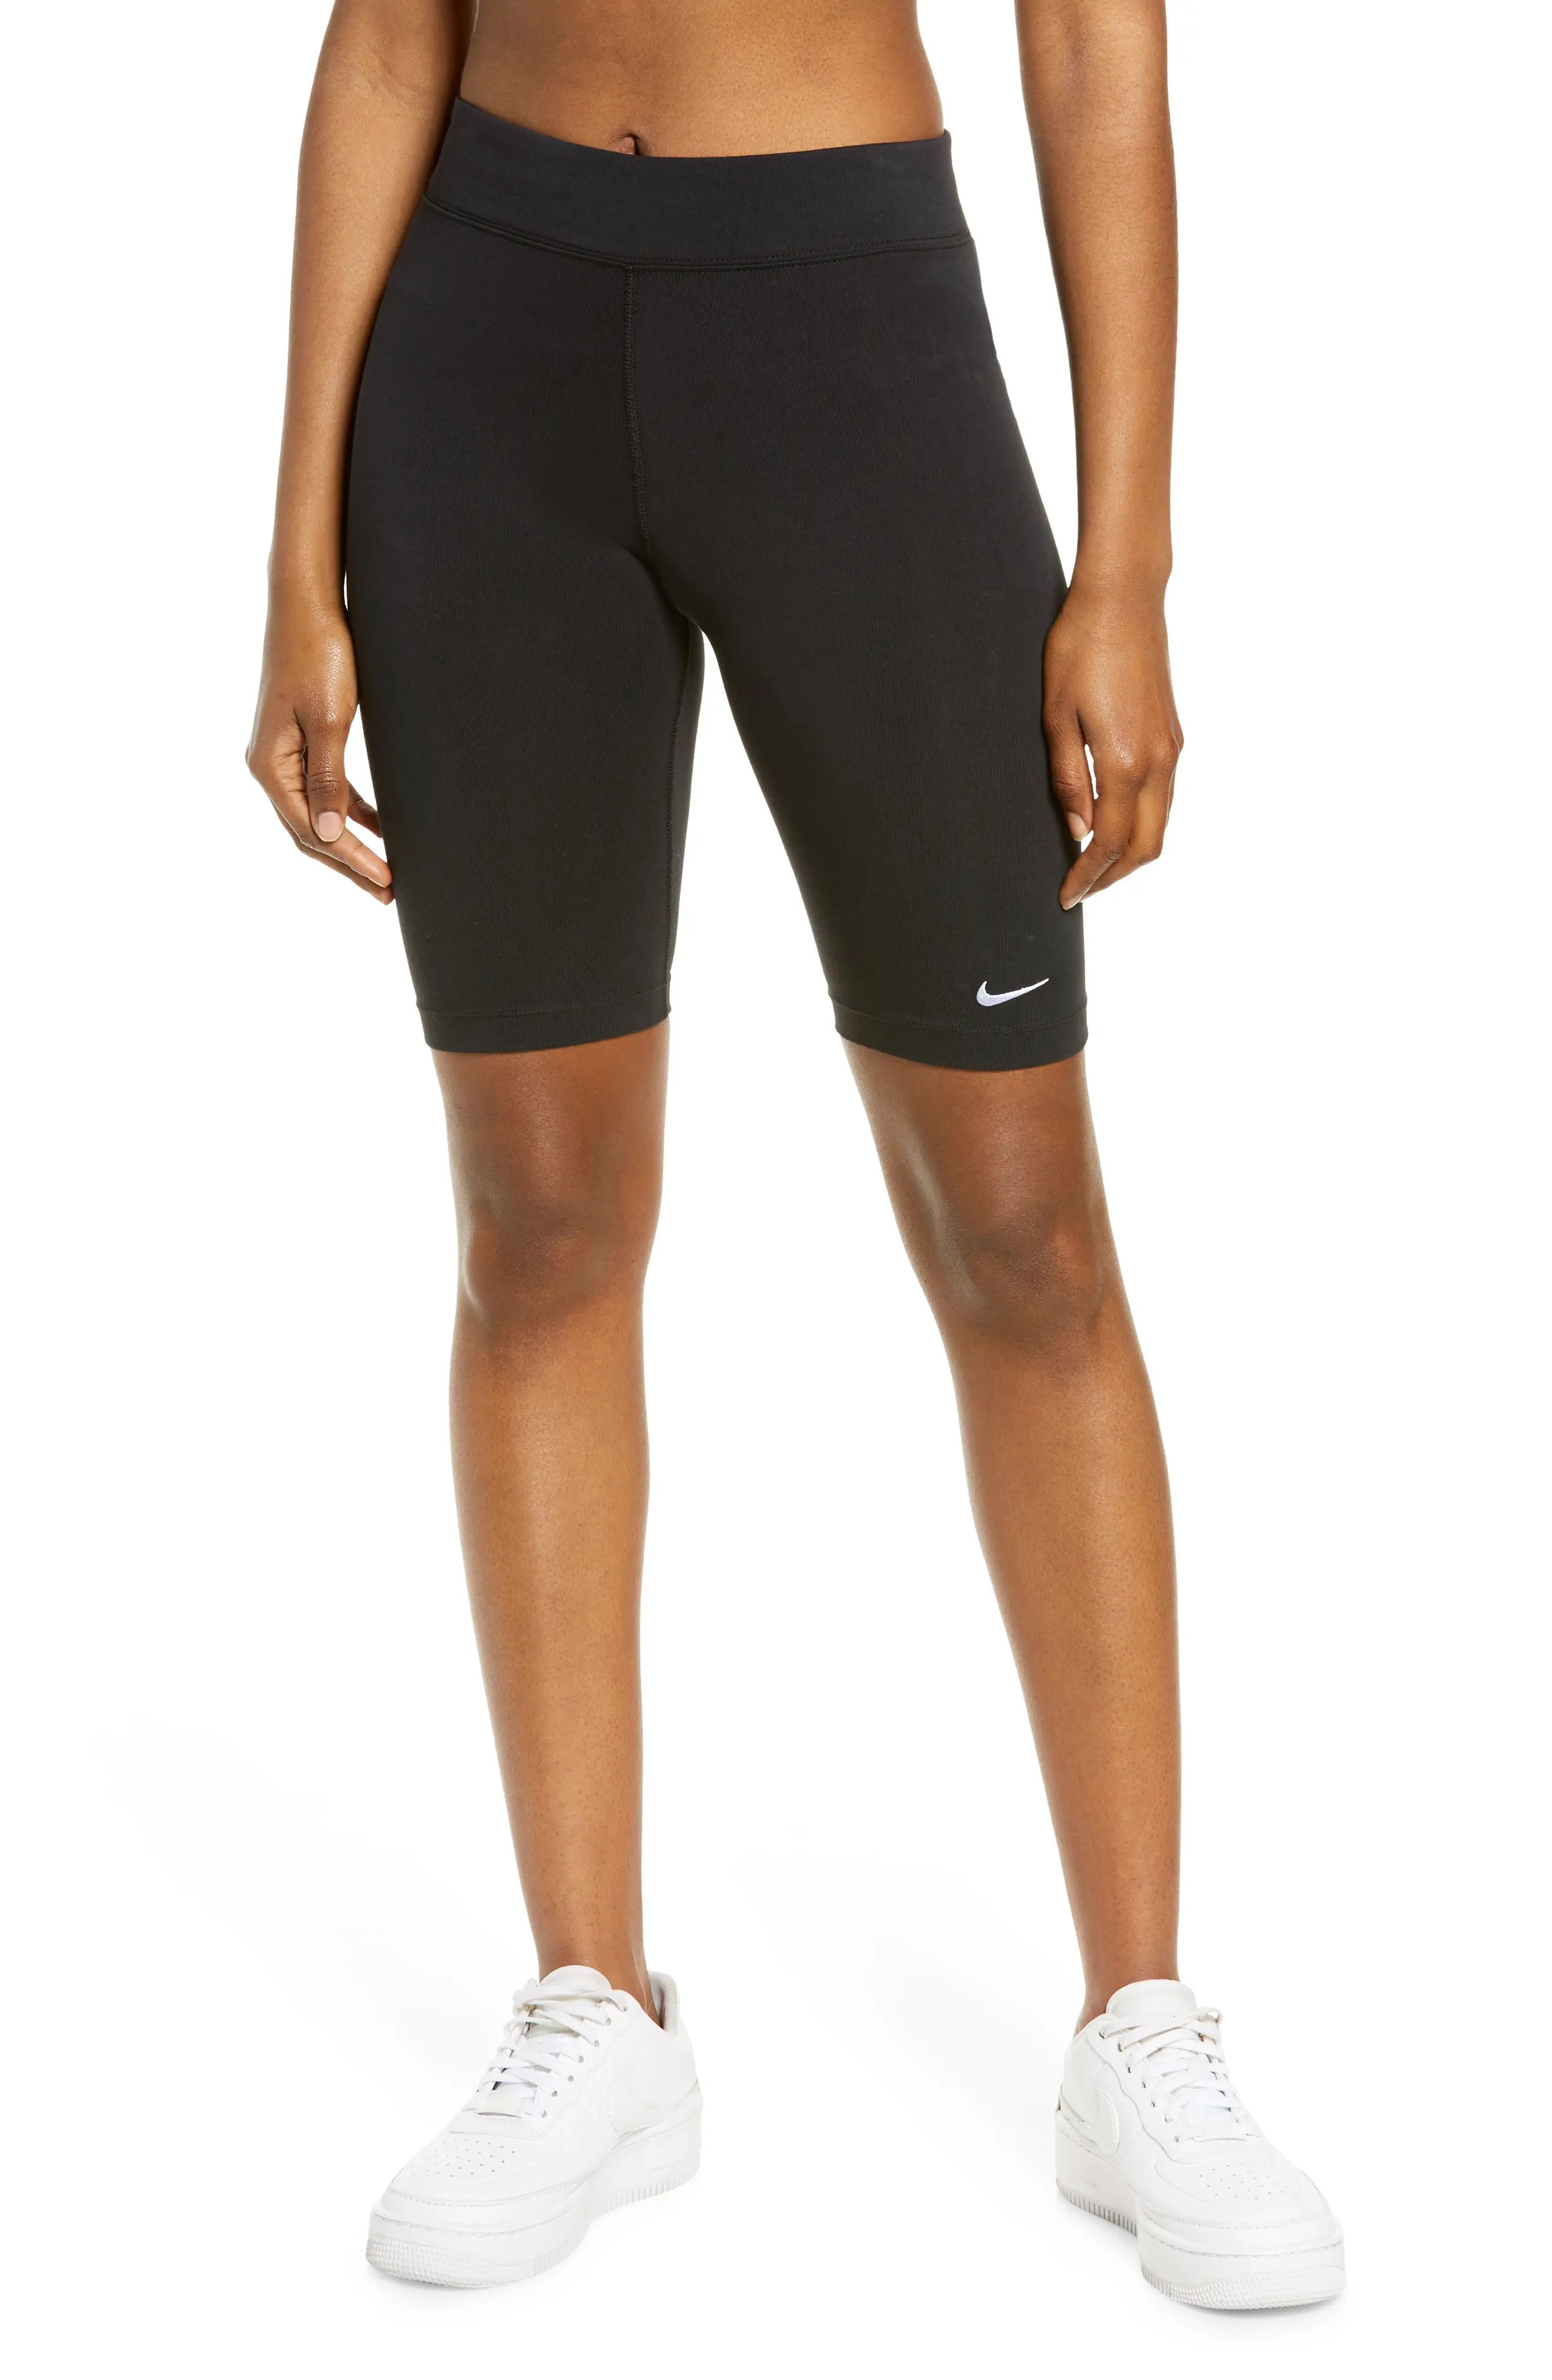 Nike Sportswear Essential Bike Shorts in Black/White at Nordstrom, Size Small | Nordstrom